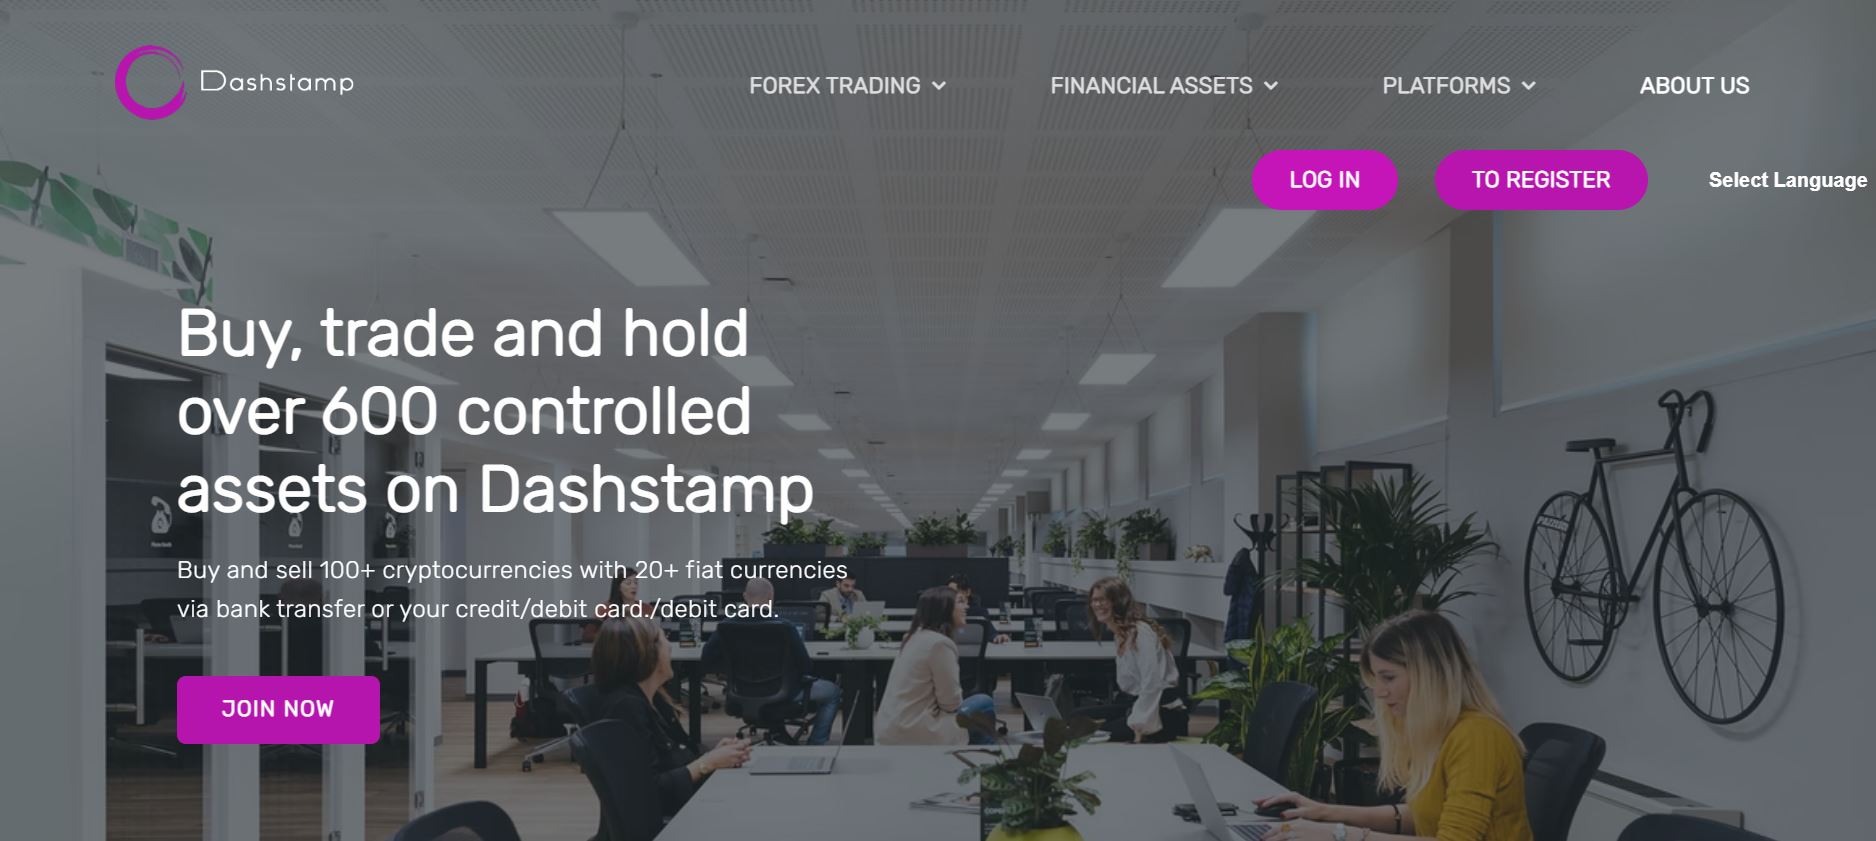 Dashstamp – Are They a Scam?